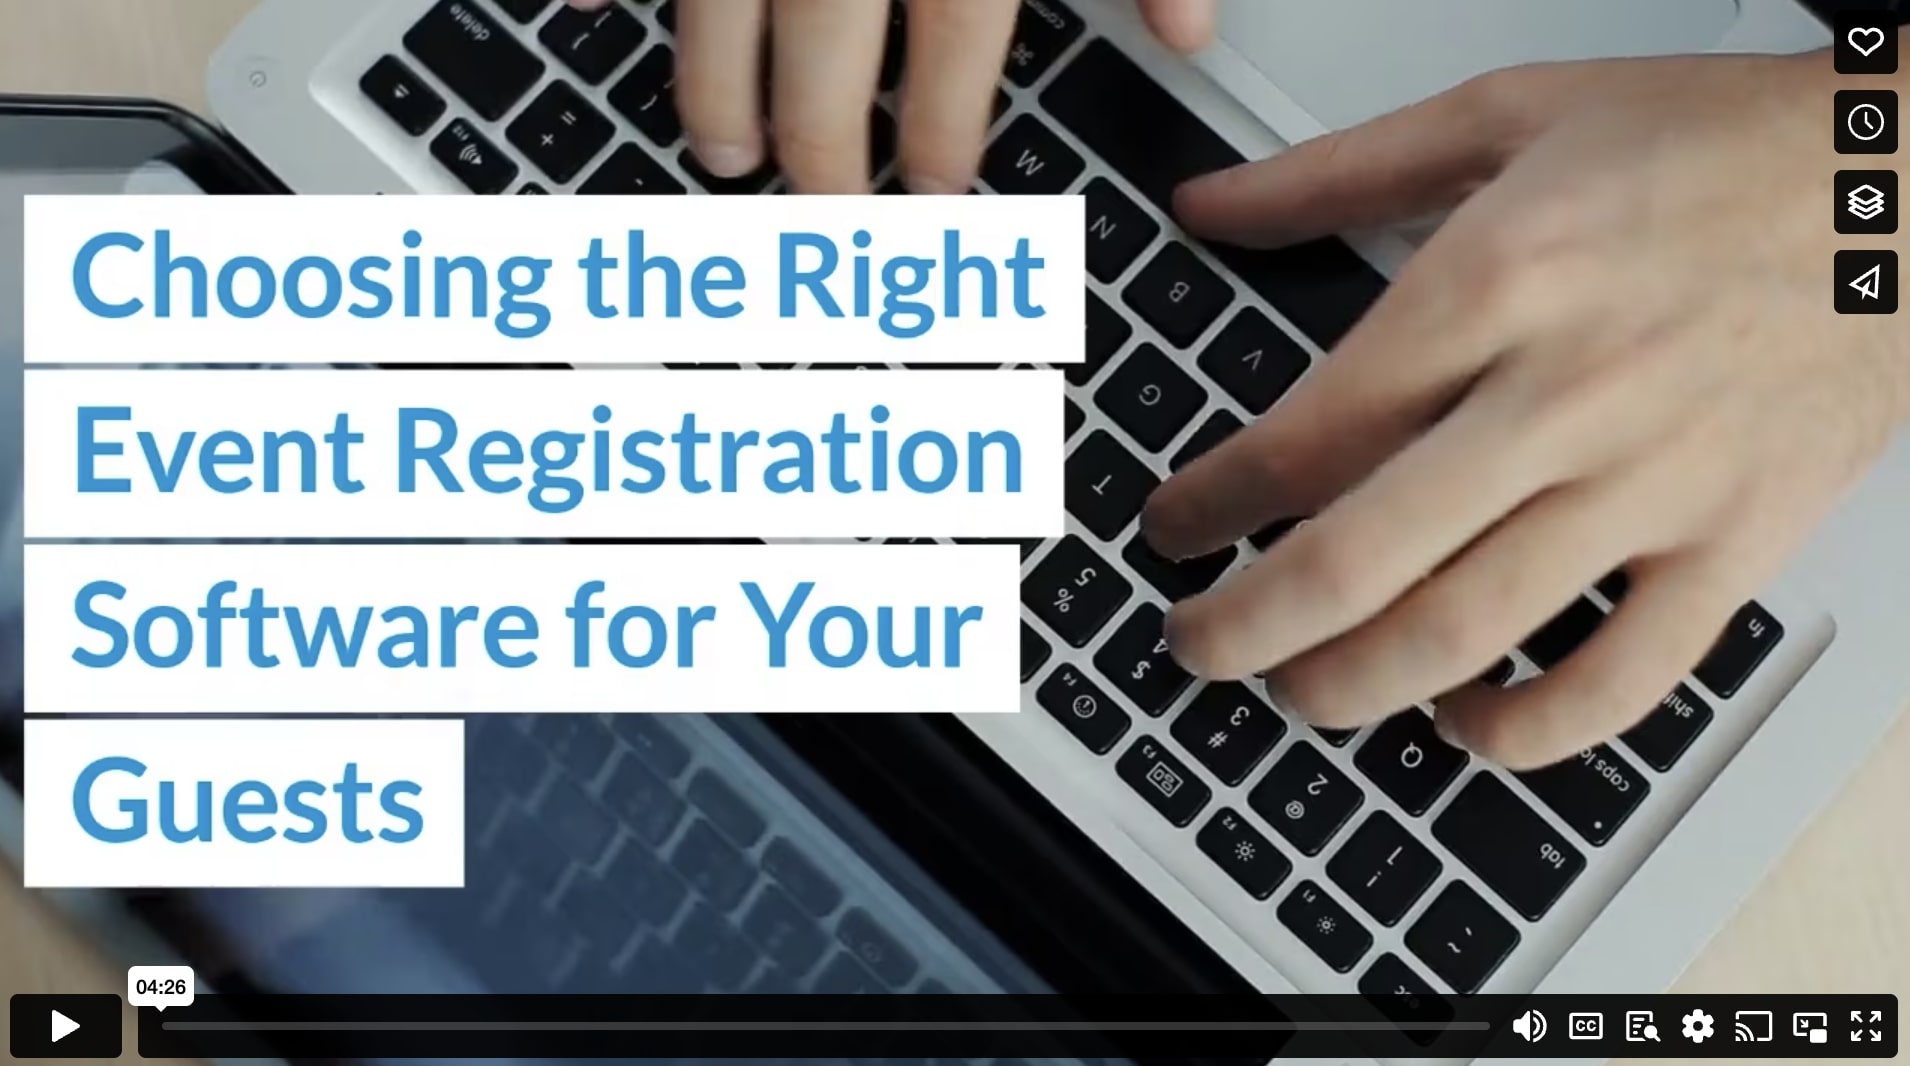 Choosing the Right Event Registration Software for Your Guests